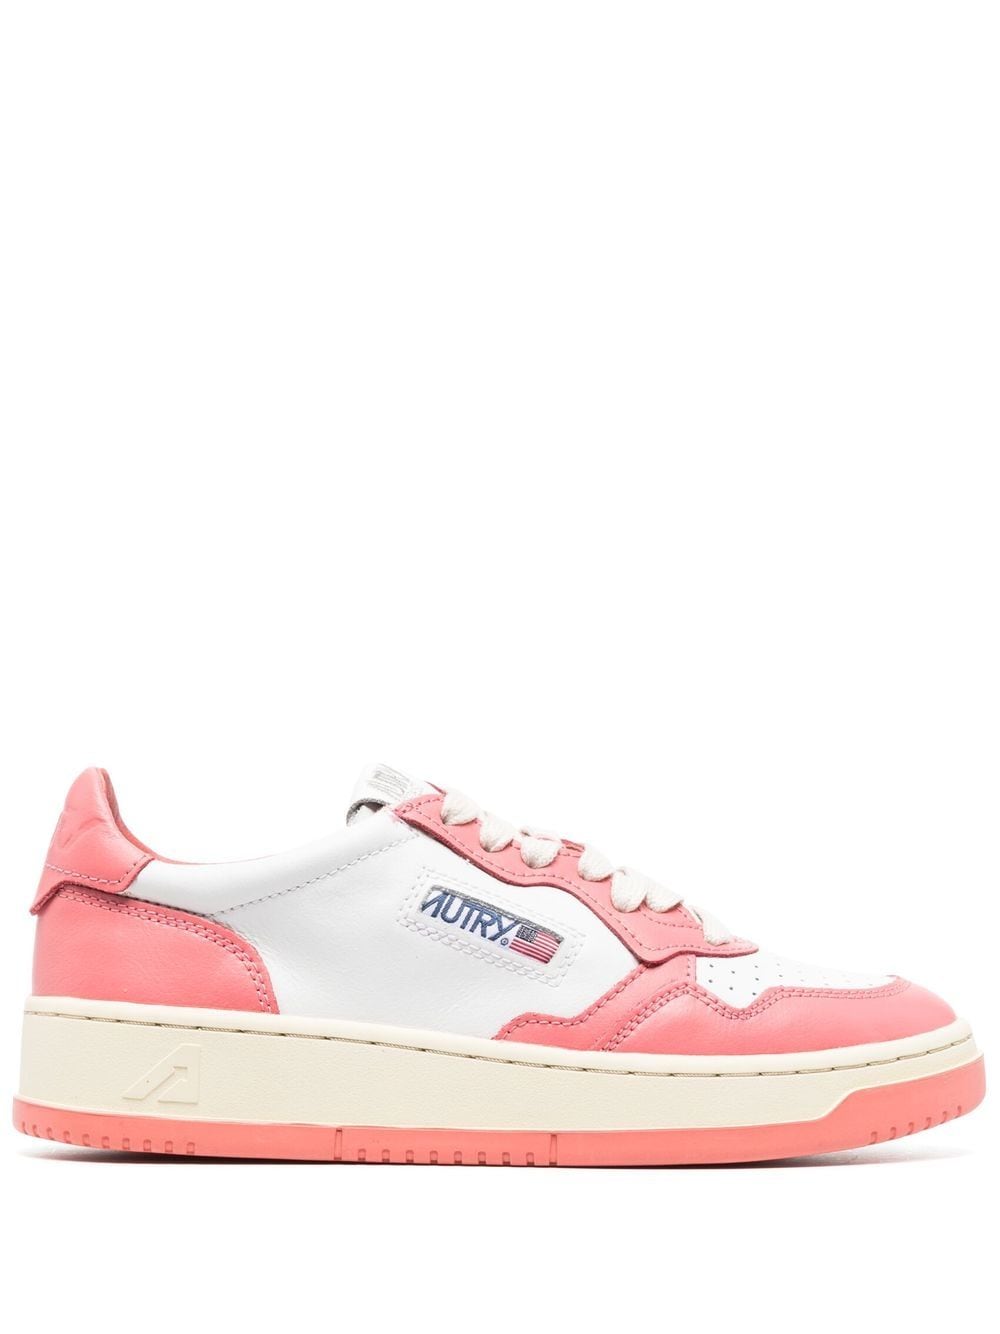 Autry leather low-top sneakers - Pink von Autry